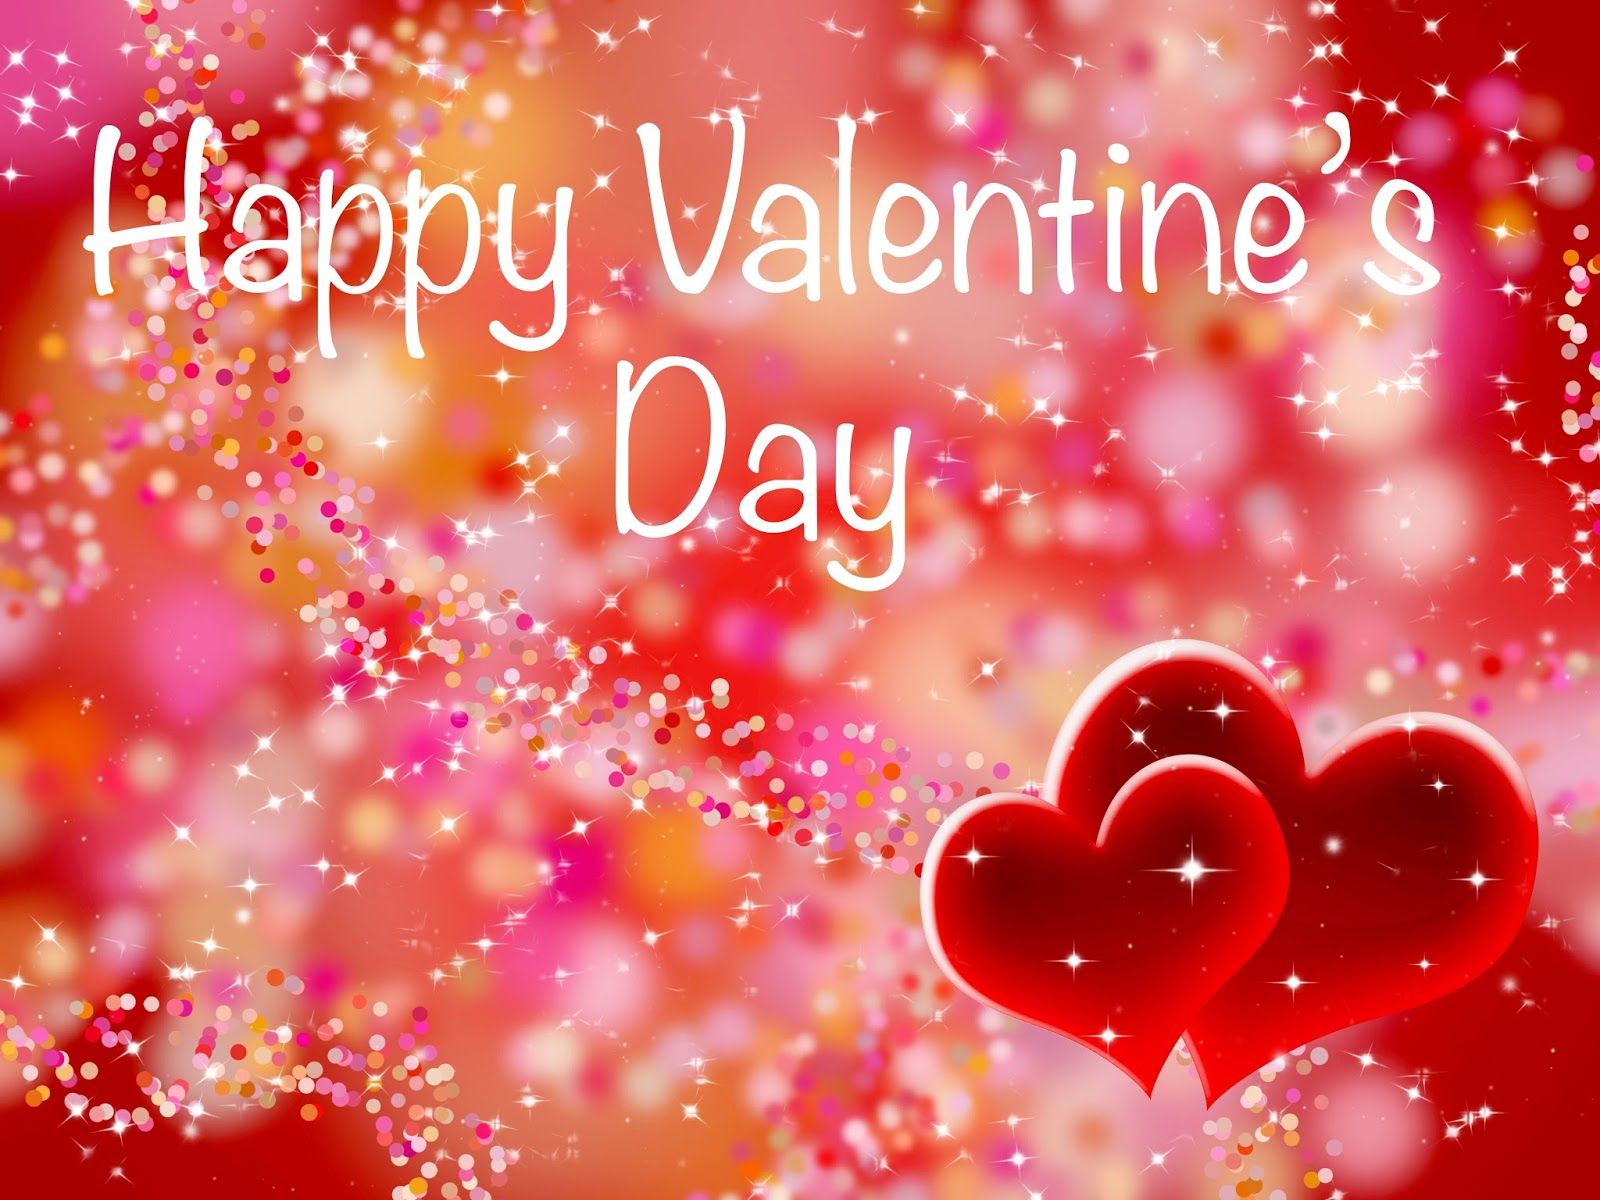 Happy Valentines Day Image Pictures Wallpaper Photos For